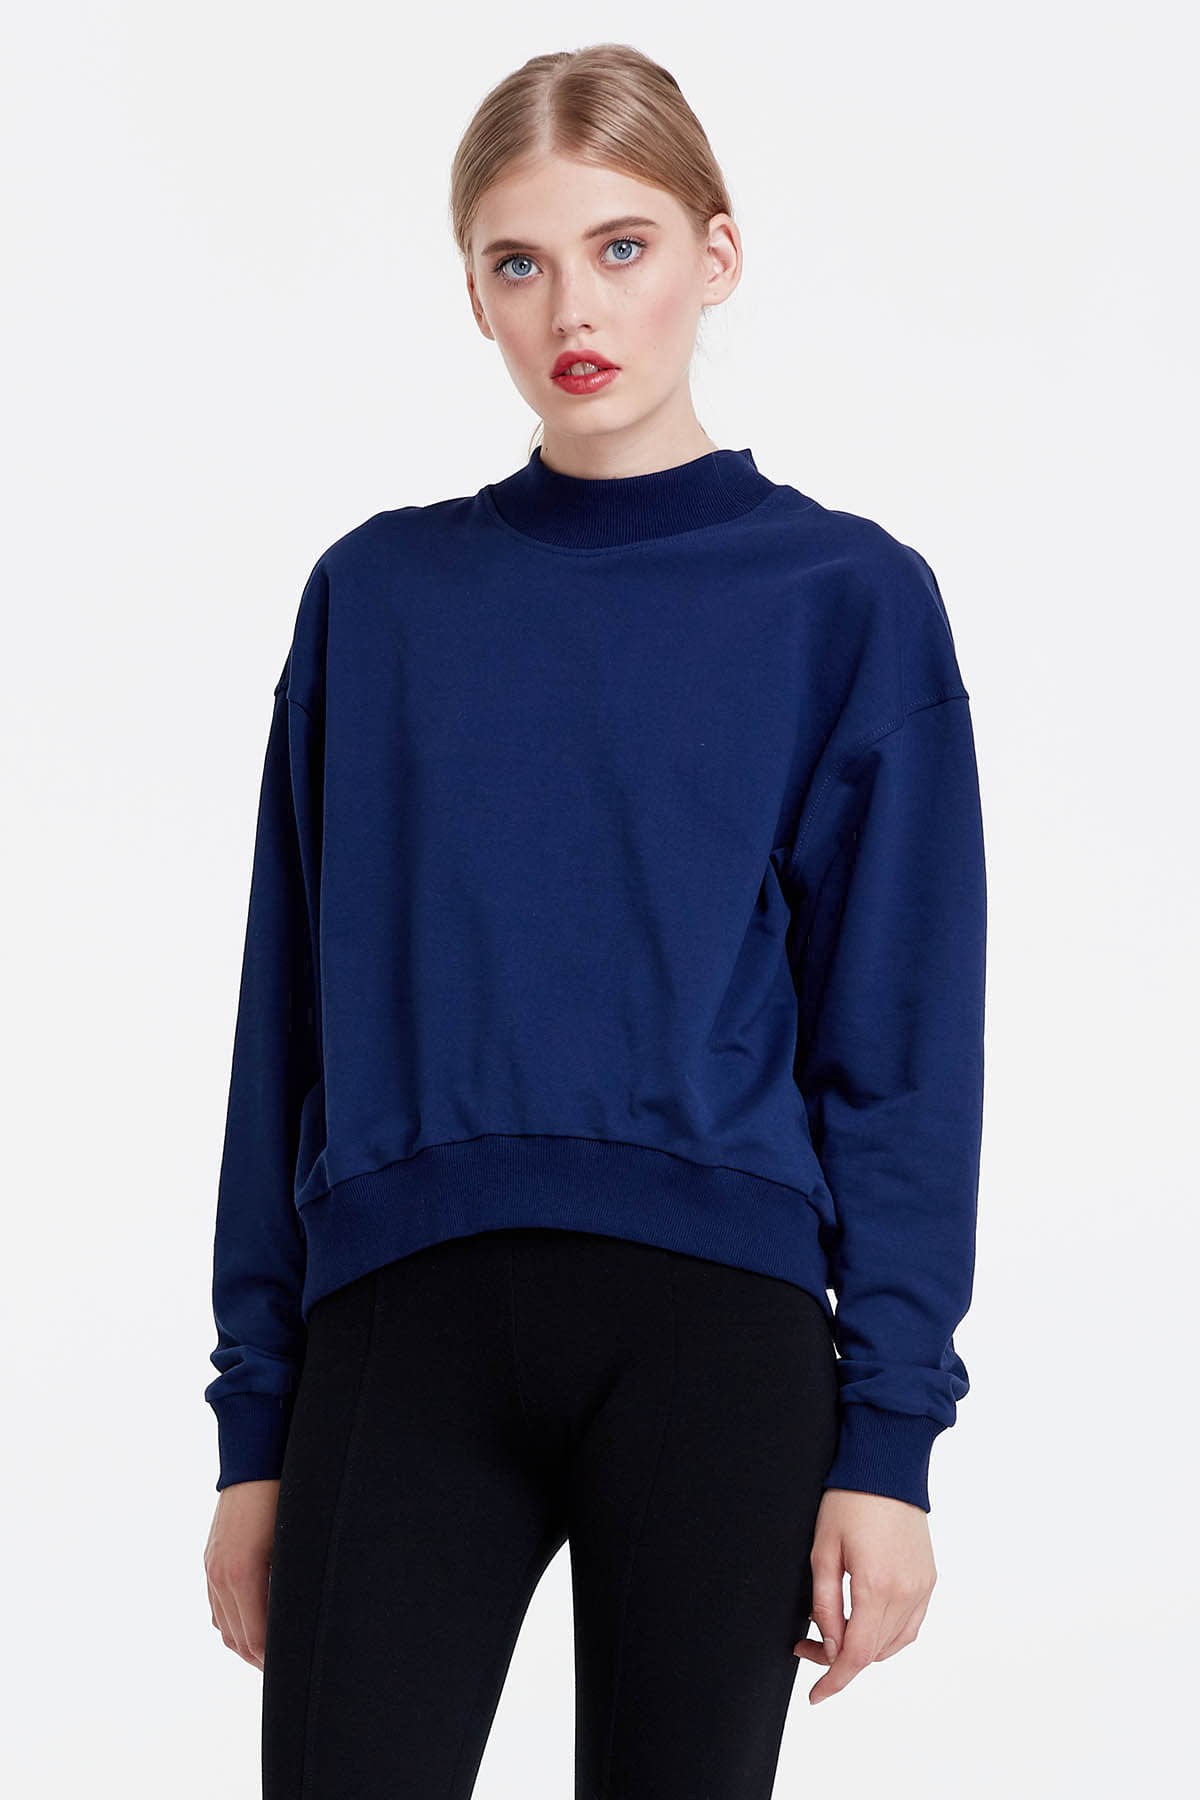 Blue sweatshirt with a zip at the back , photo 2